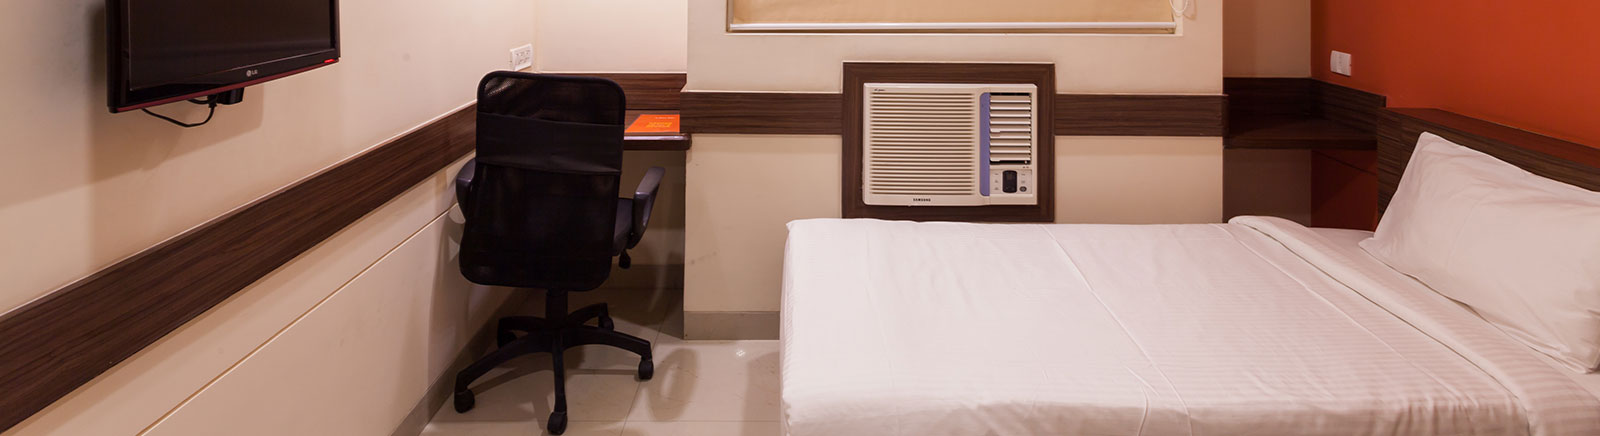 Ginger Indore Hotel Rooms